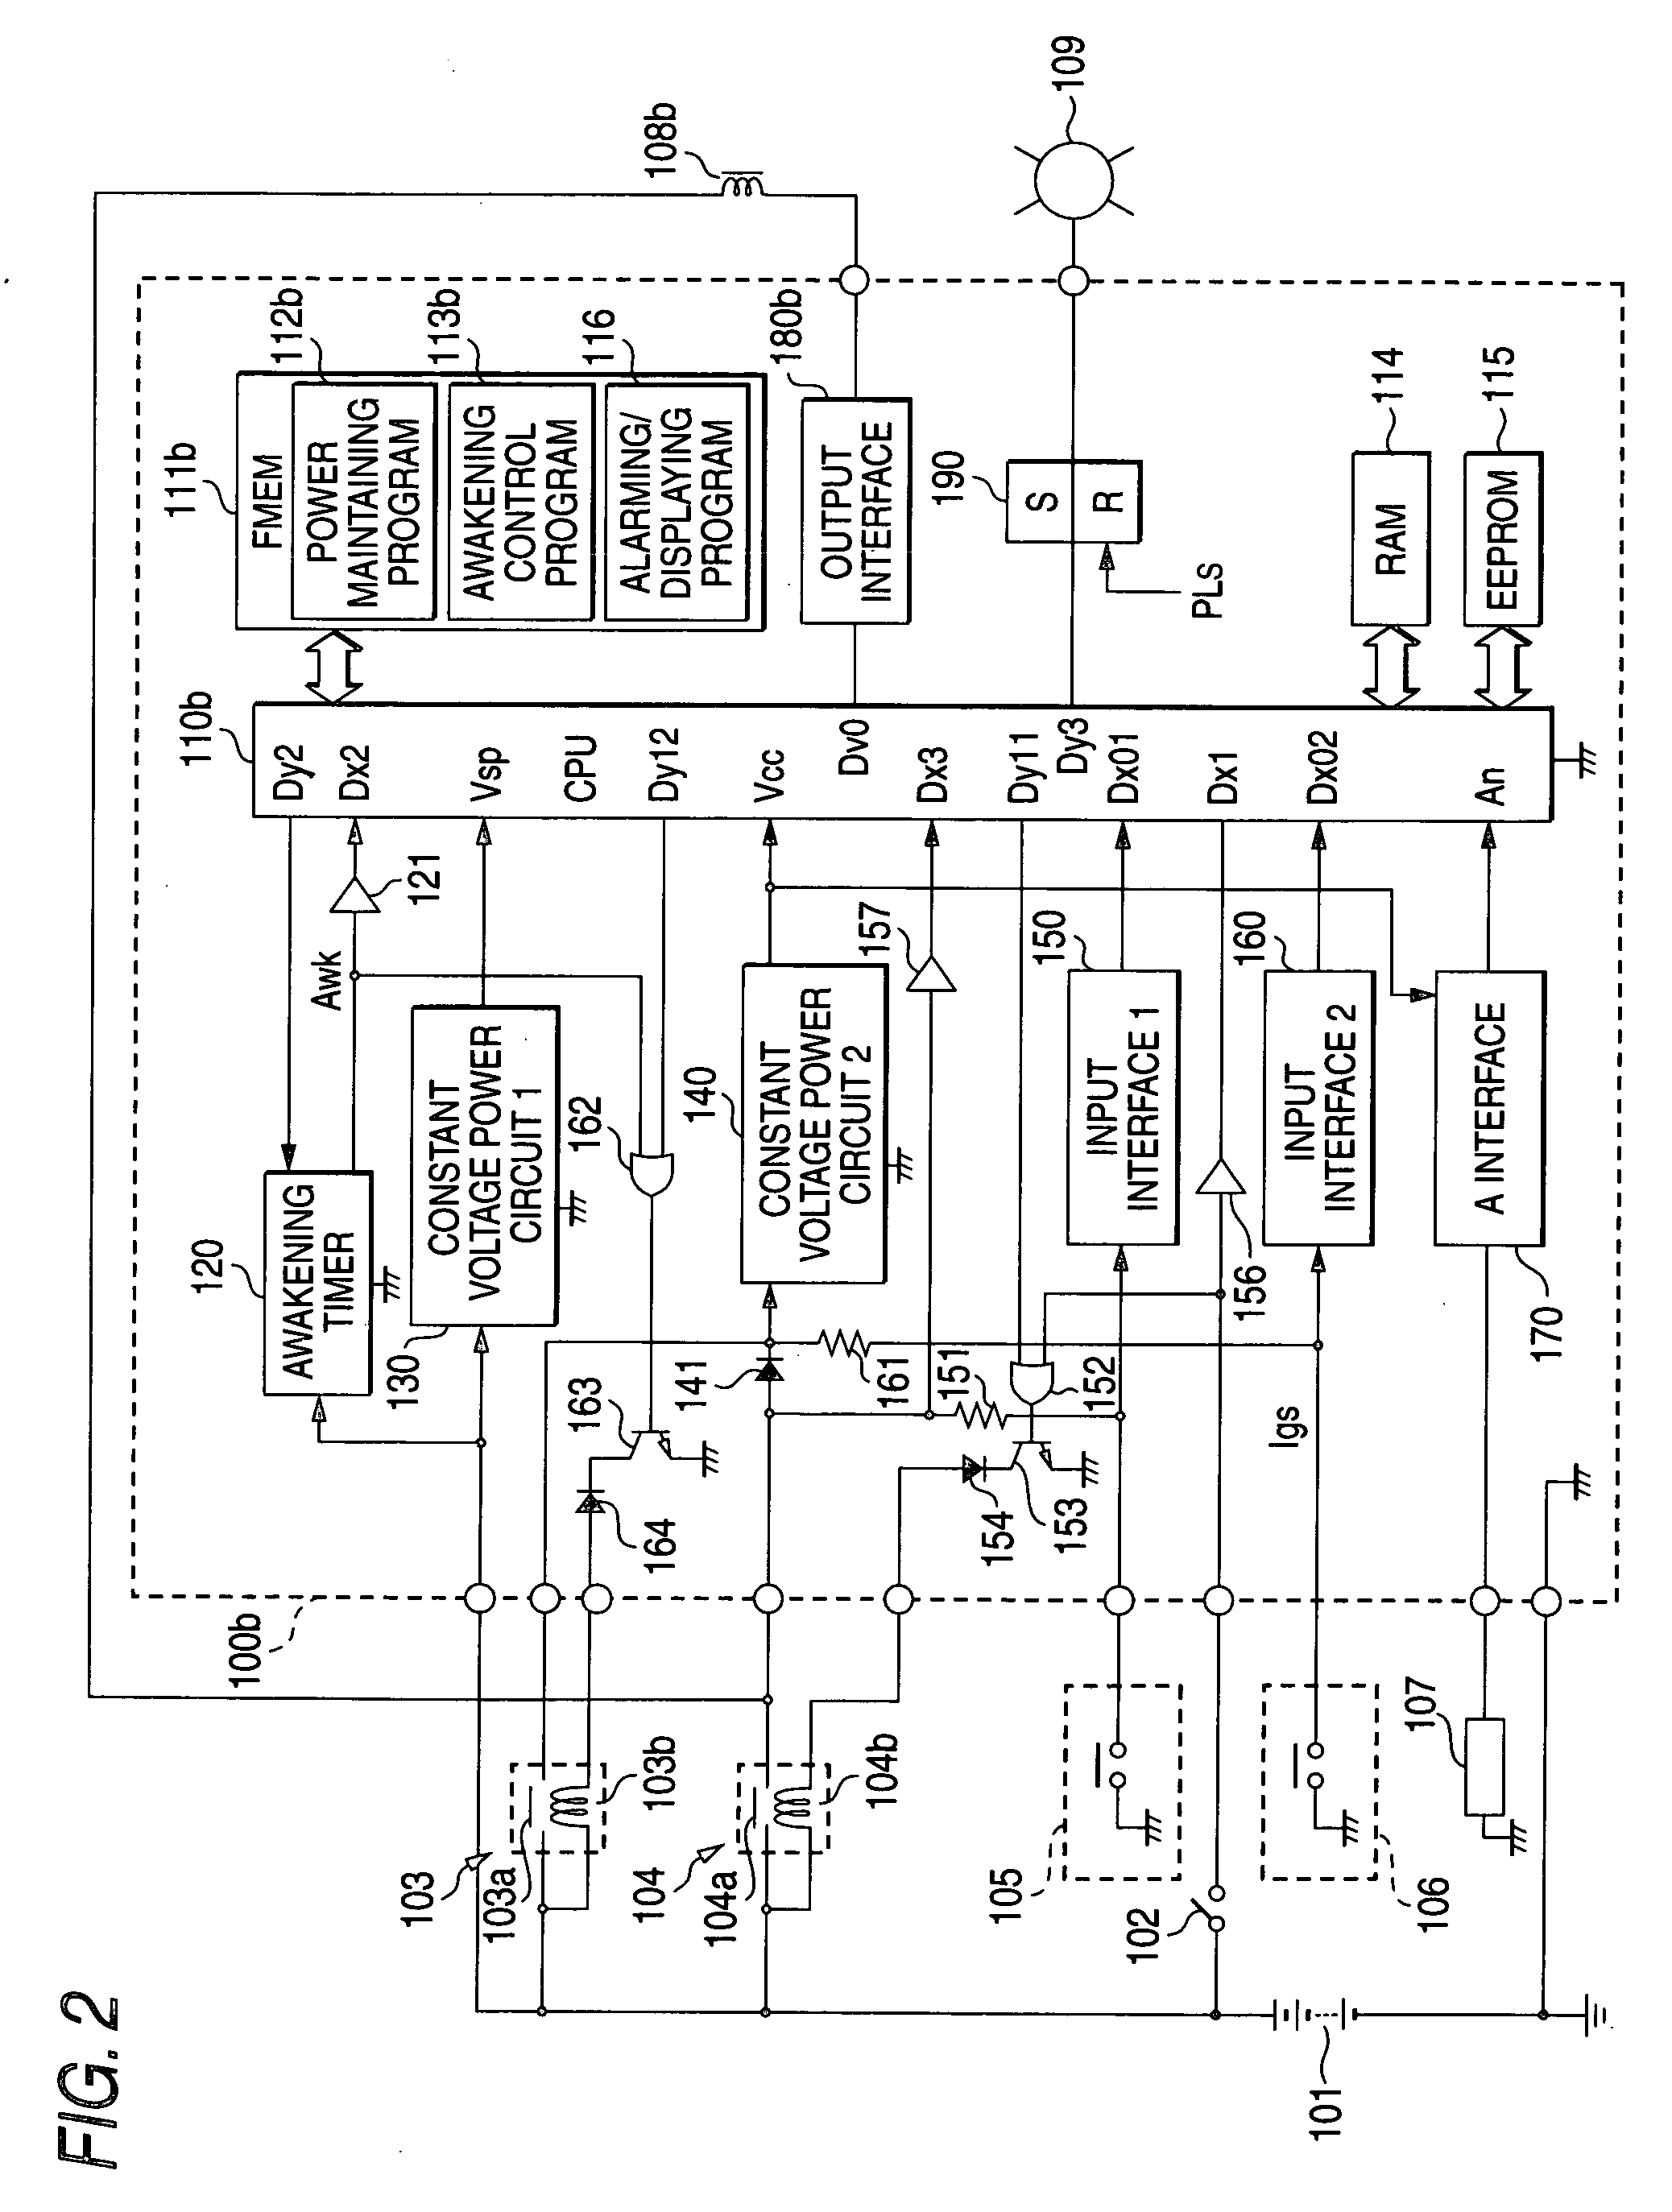 Power circuit of a vehicular electronic control unit